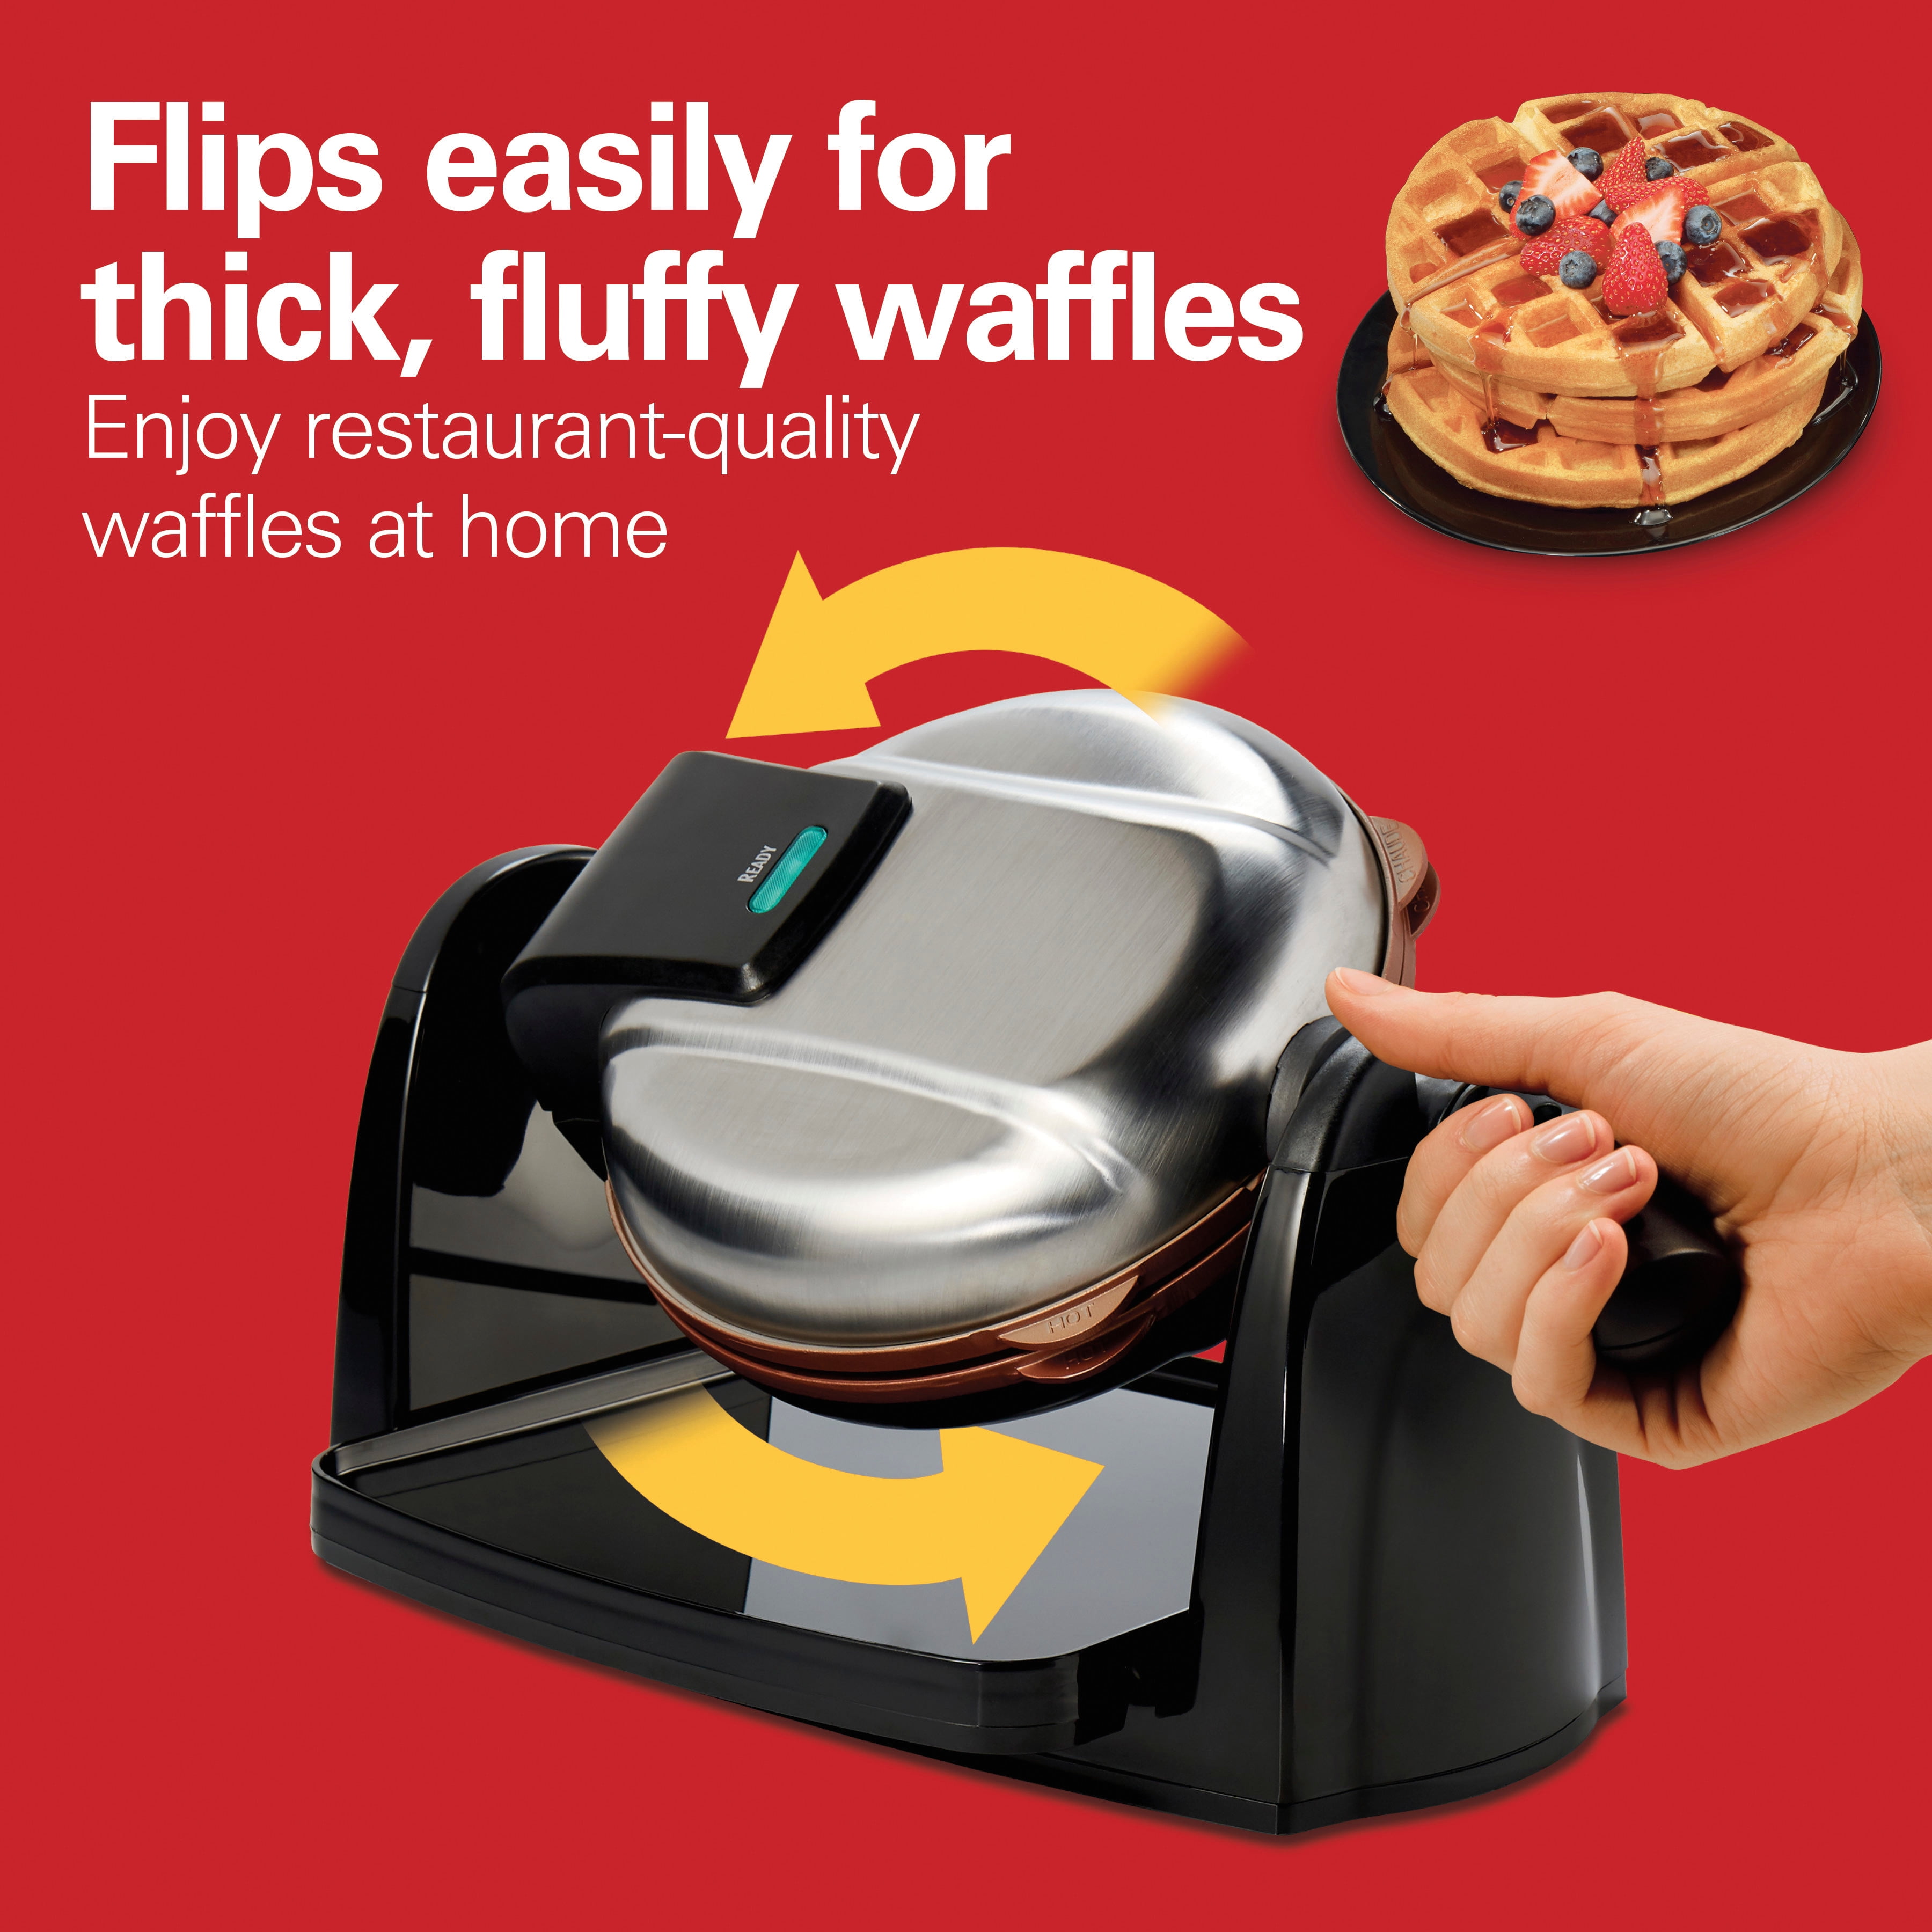 Waffle Maker, Belgian Waffle Maker Iron 180° Flip Double Waffle, 8 Slices,  Rotating & Nonstick Plates, Removable Drip Tray, Cool Touch Handle, Black